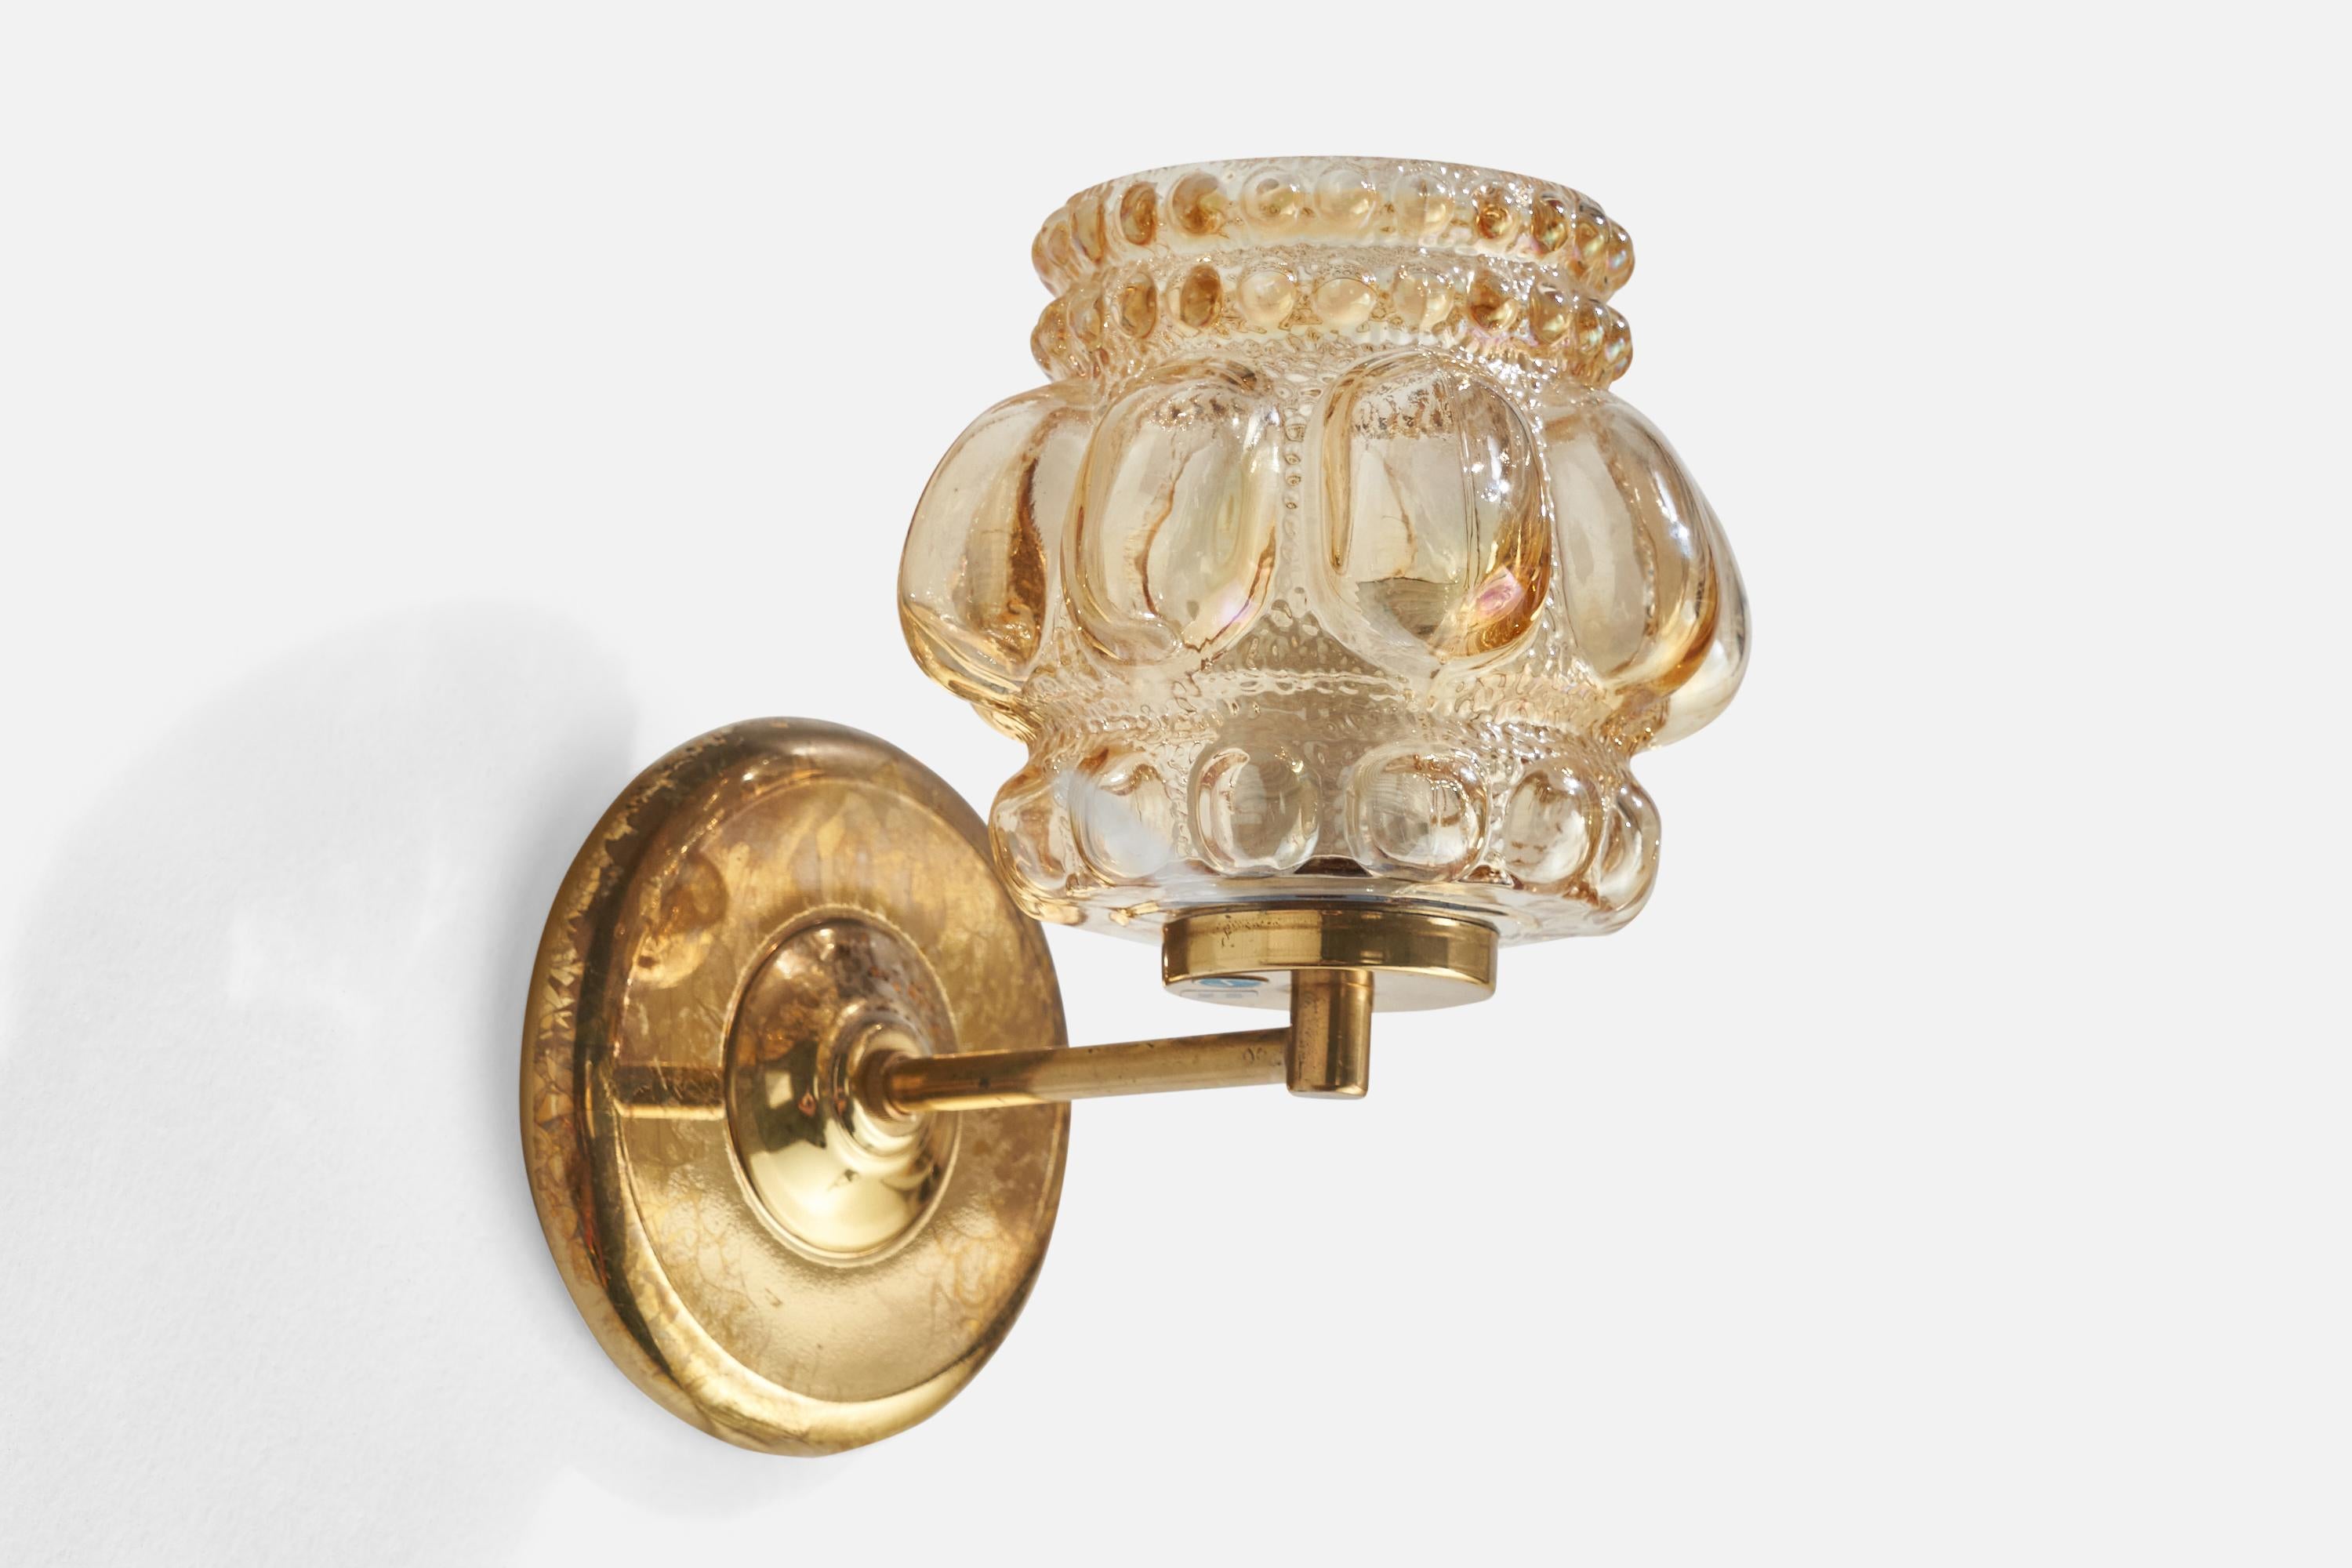 A brass and glass wall light designed by Helena Tynell and produced by Glashütte Limburg, Germany, 1960s.

Overall Dimensions (inches): 8” H x 5.25” W x 7.5” D
Back Plate Dimensions (inches): 5” H x 5” W x .75” D
Bulb Specifications: E-26